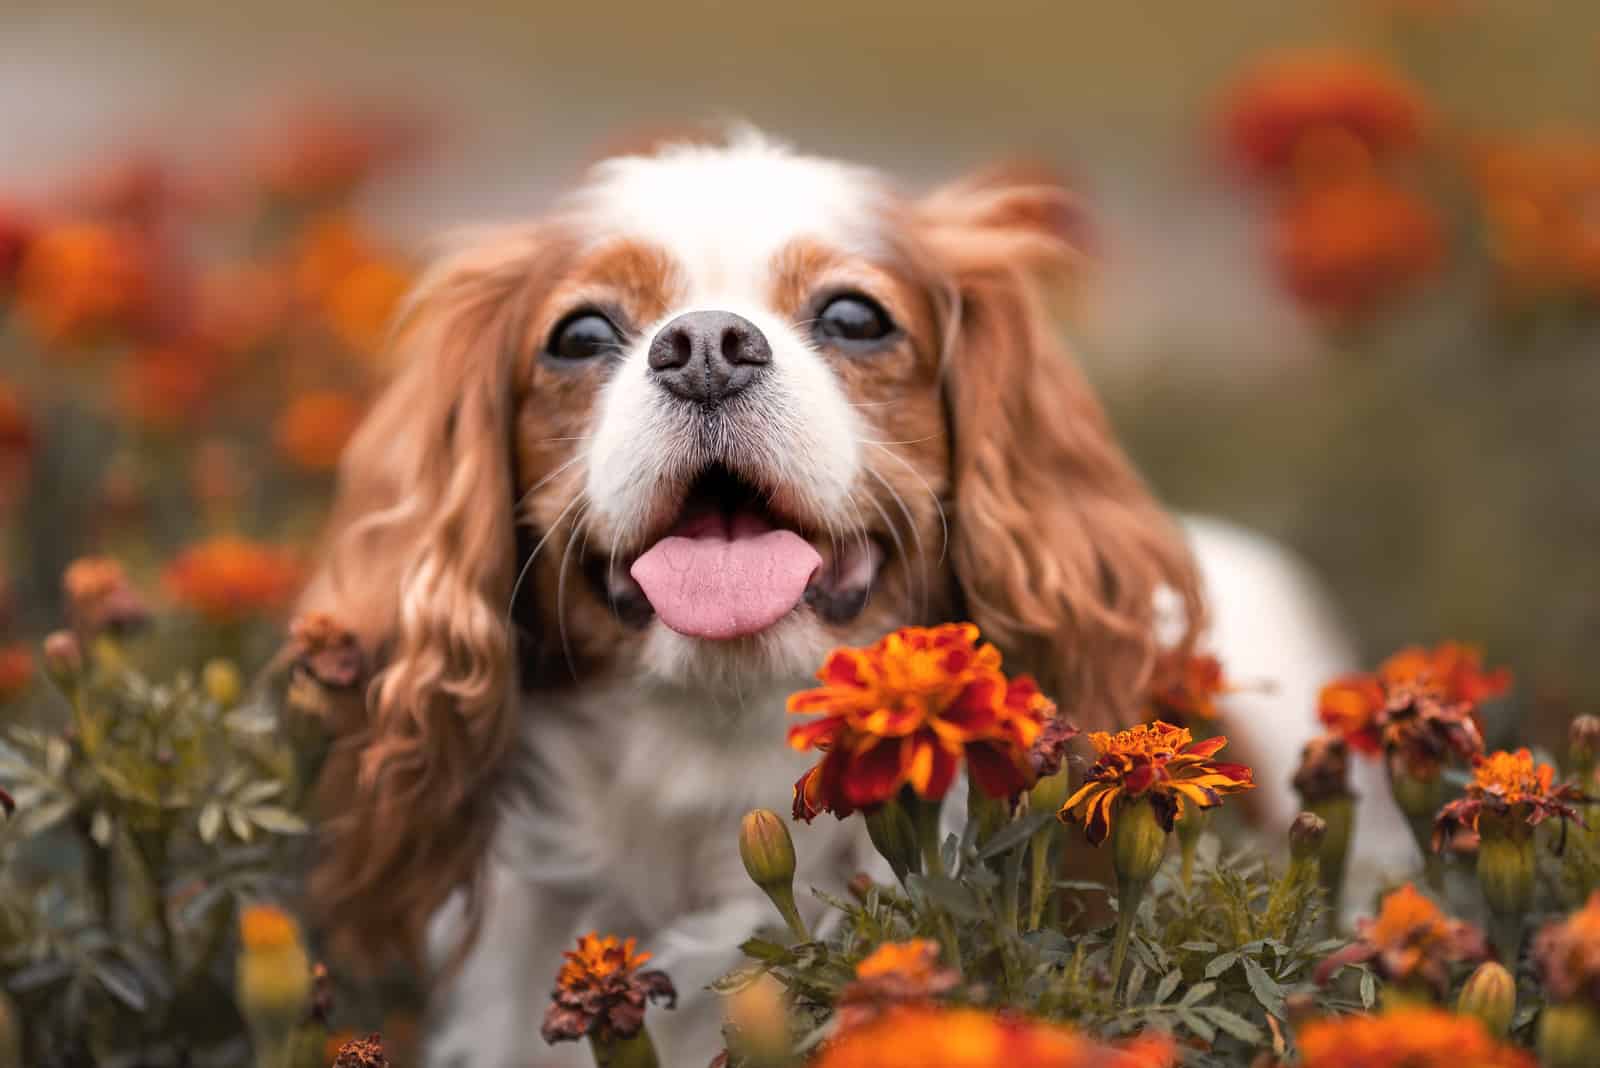 cavalier king charles dog with tongue out among orange flowers